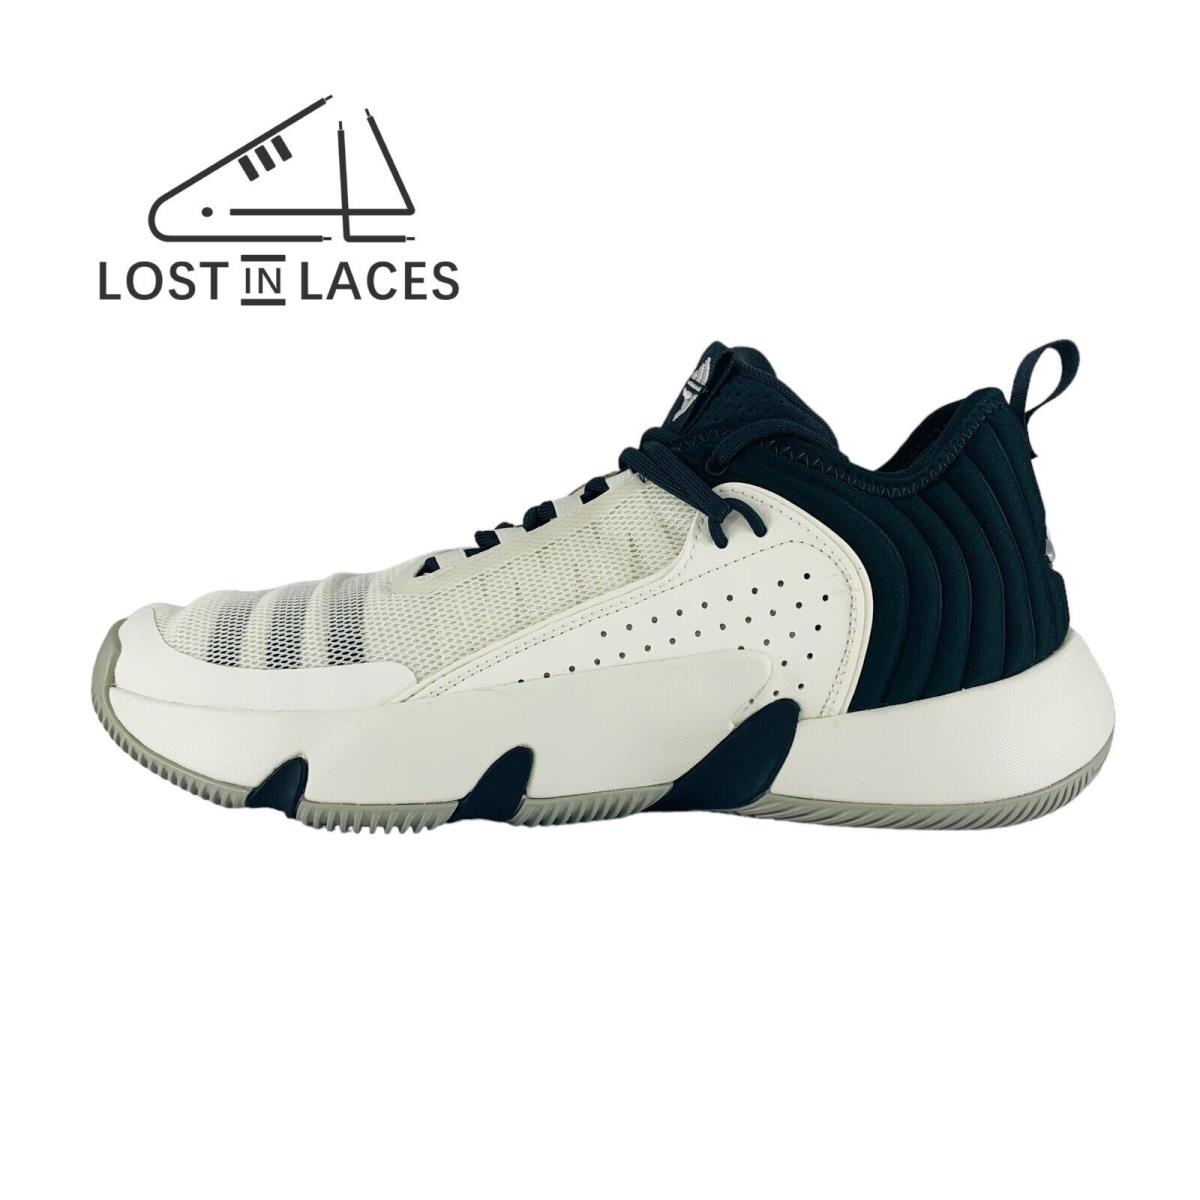 Adidas Trae Unlimited White Black Sneakers Men`s Basketball Shoes IF5609